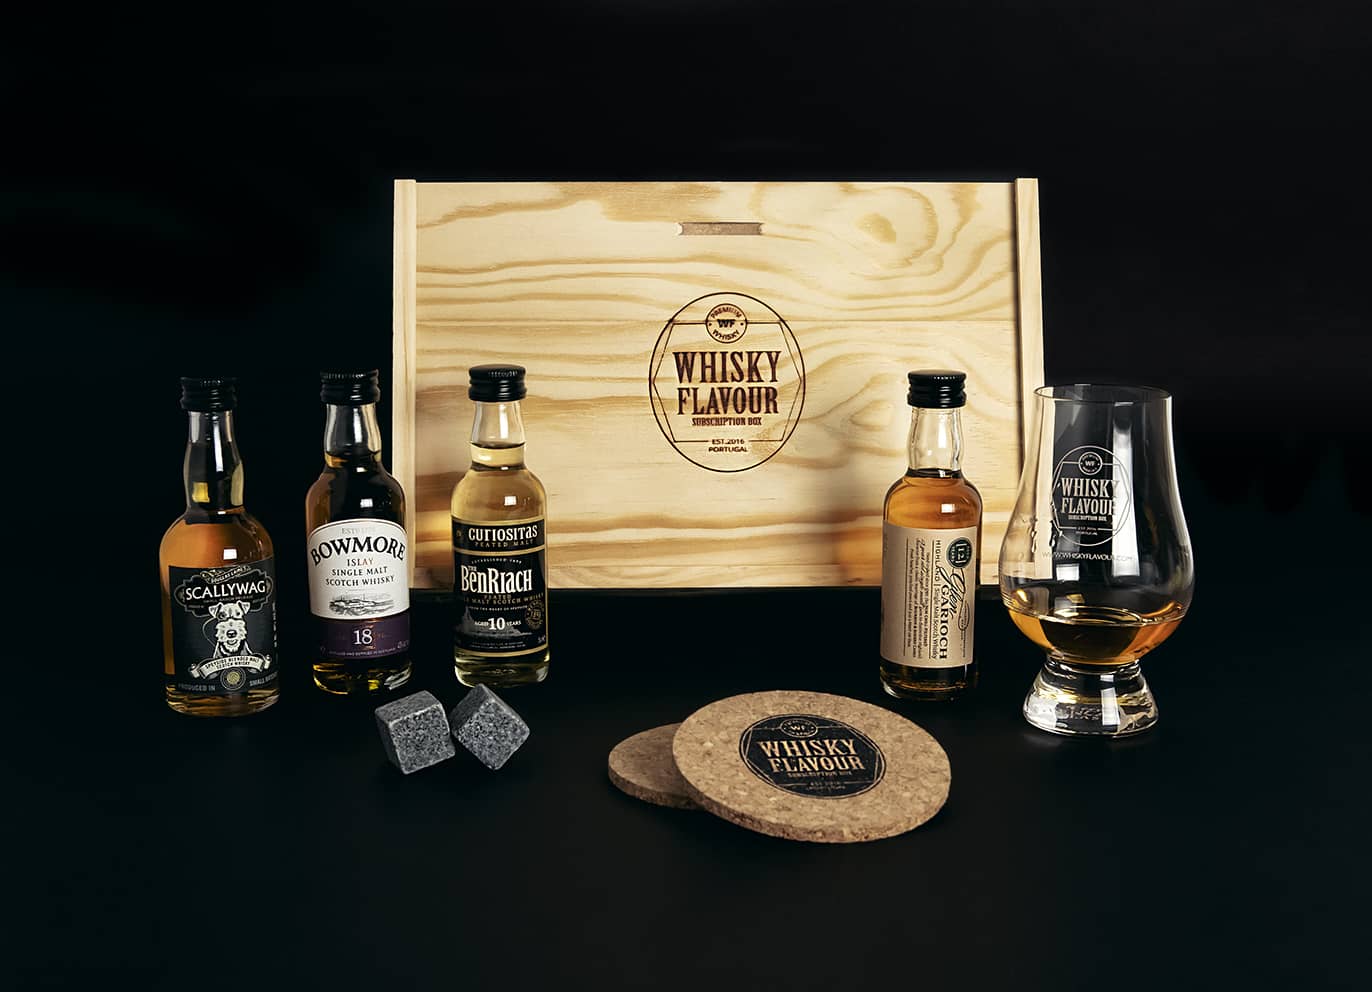 Whisky Flavour whisky monthly box